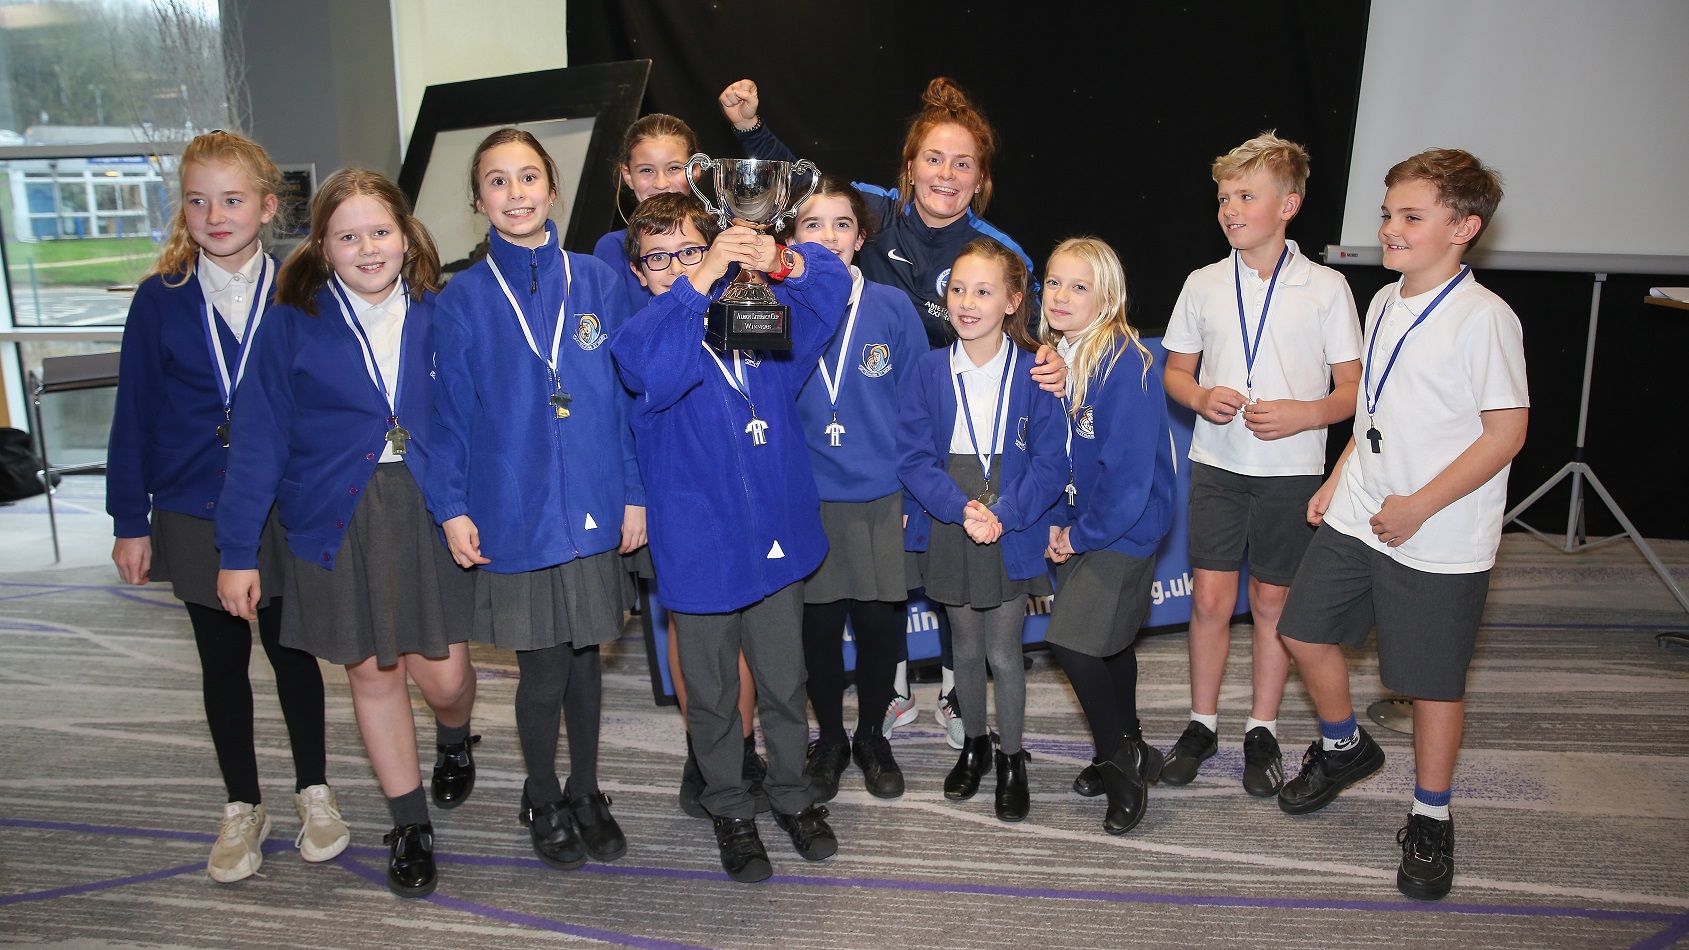 Schools compete for Albion Literacy Cup during education day at the Amex Stadium